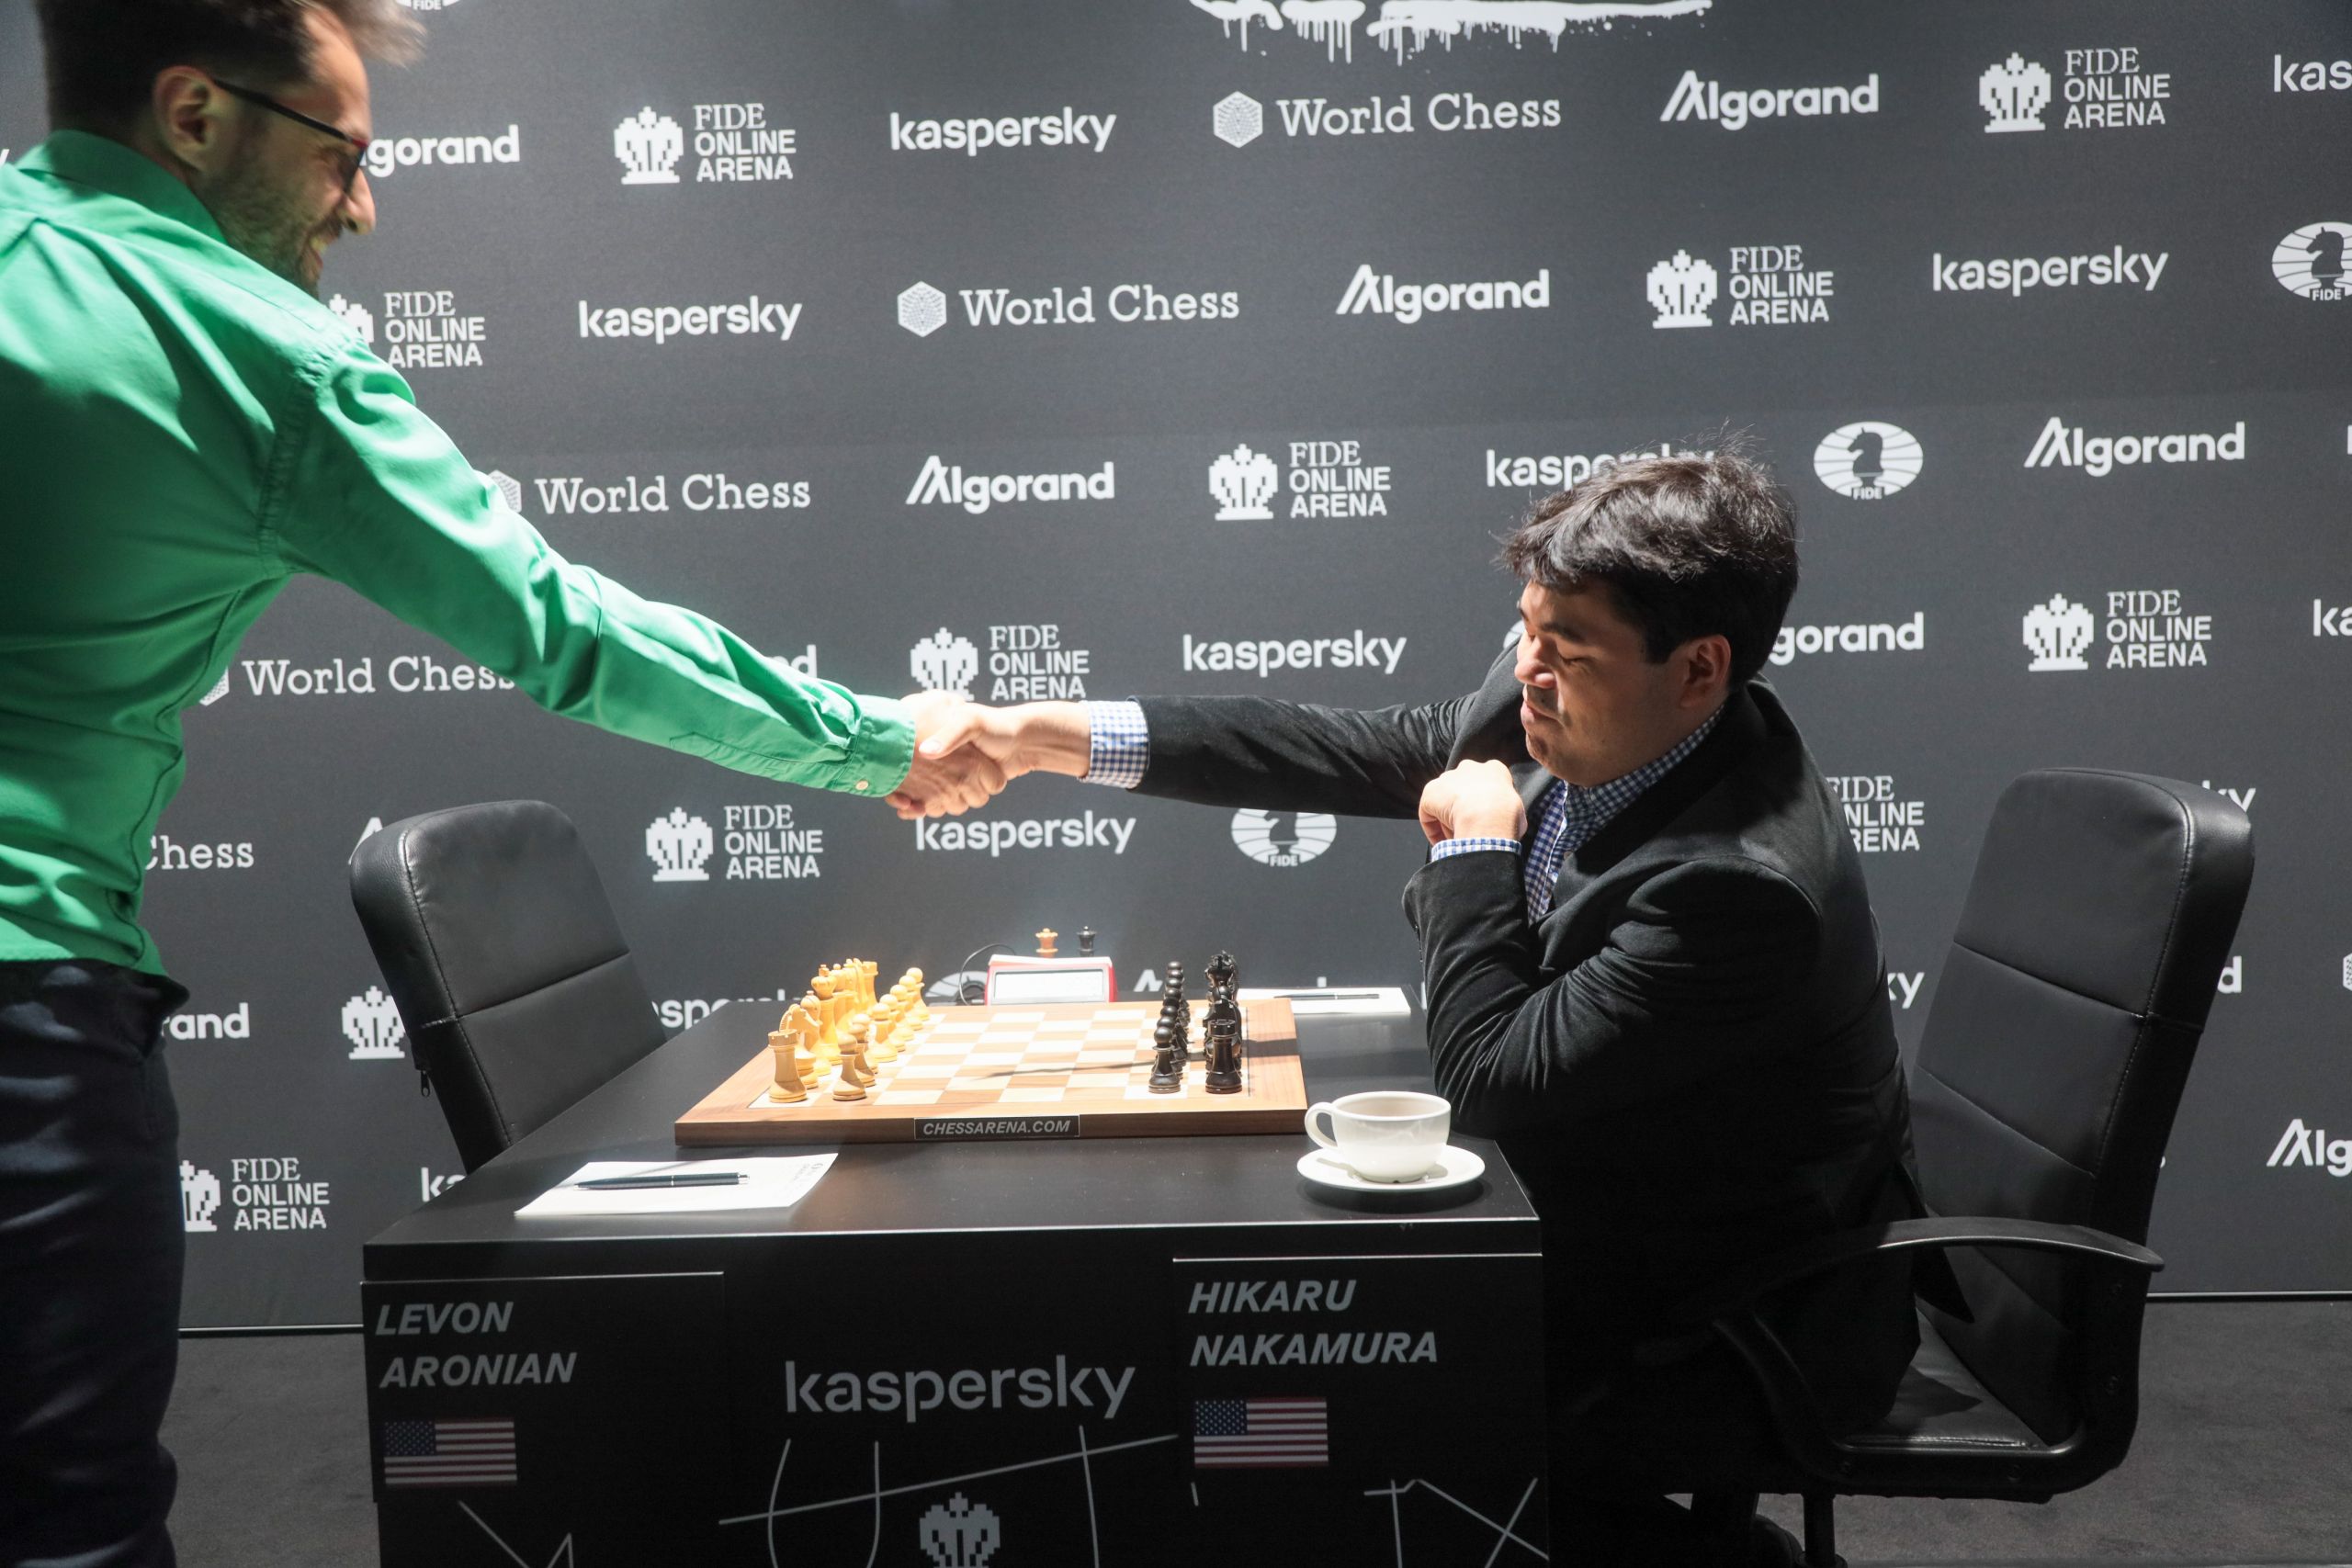 Berlin to host FIDE Grand Prix finale as players eye Candidates Tournament  spots